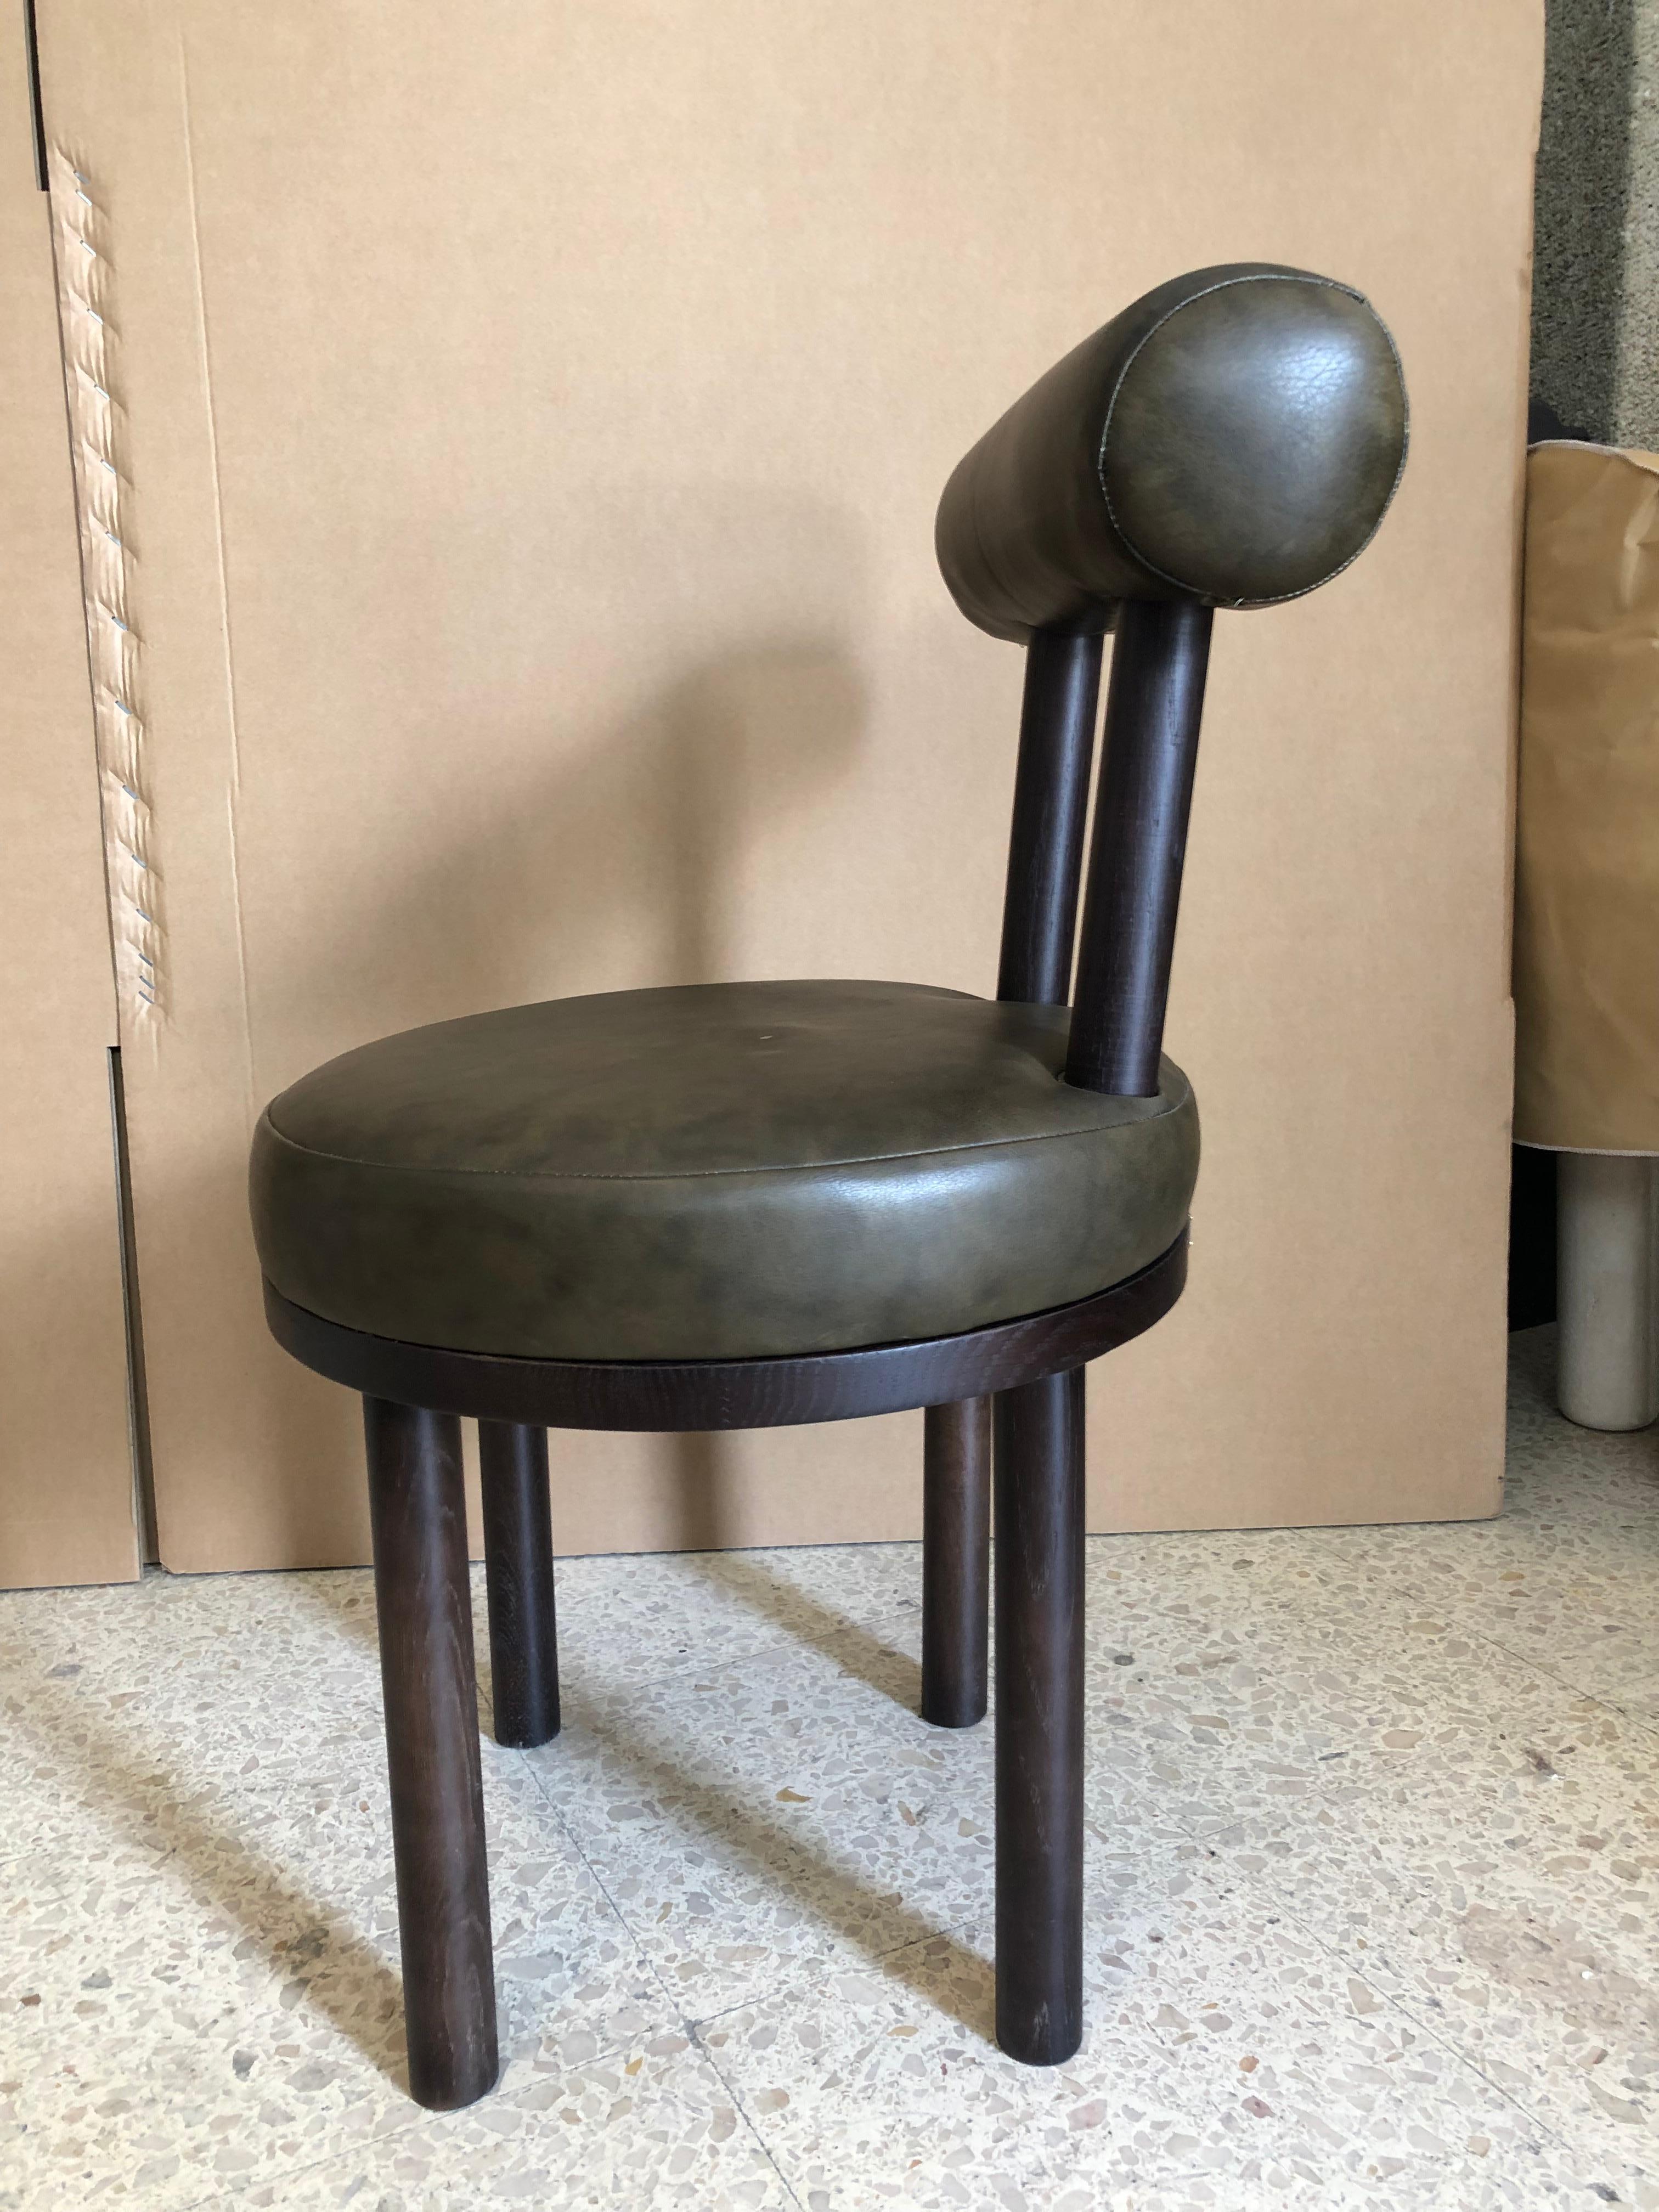 A chair that mixes both modern and classical design approaches.

Designed to hug the body, durable and solid chair features a body structure produced in solid wood.

DIMENSIONS
W 51 cm  20”
D 53 cm  21”
H 86 cm  34”
SH 49cm  19”

PRODUCT